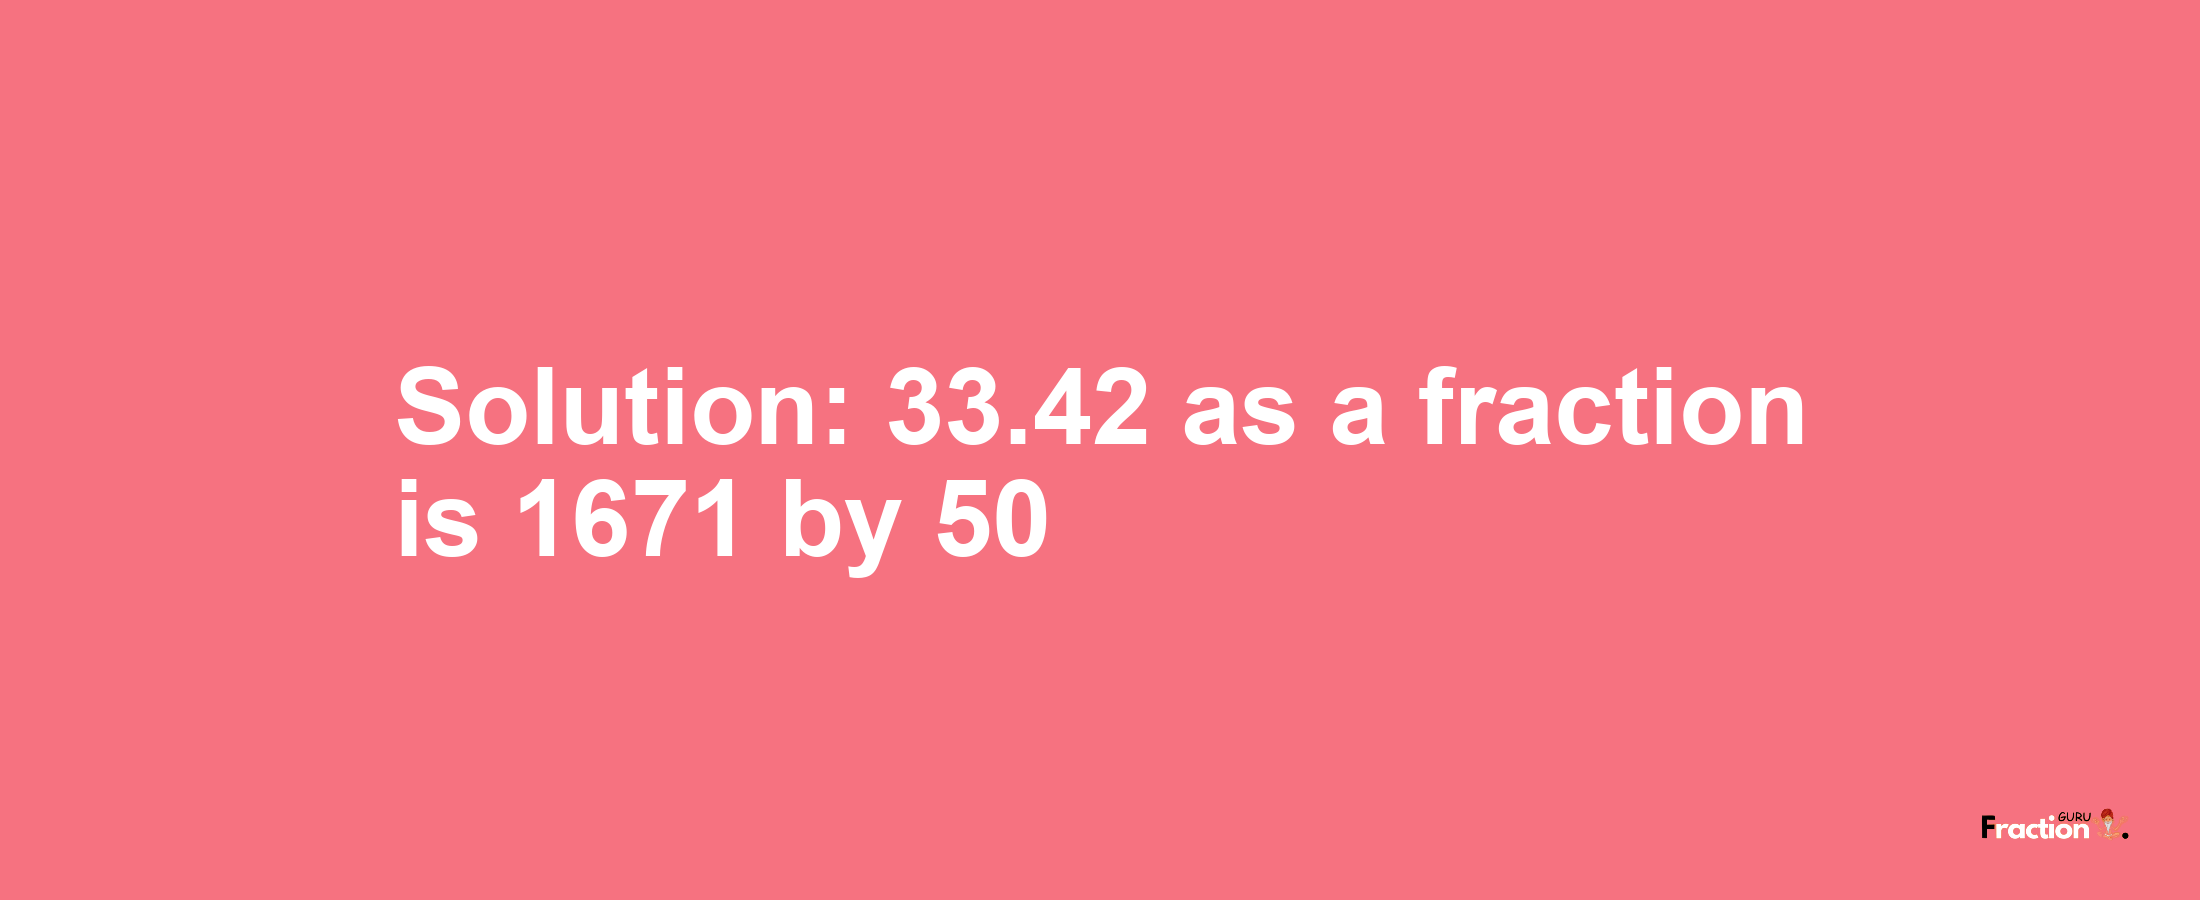 Solution:33.42 as a fraction is 1671/50